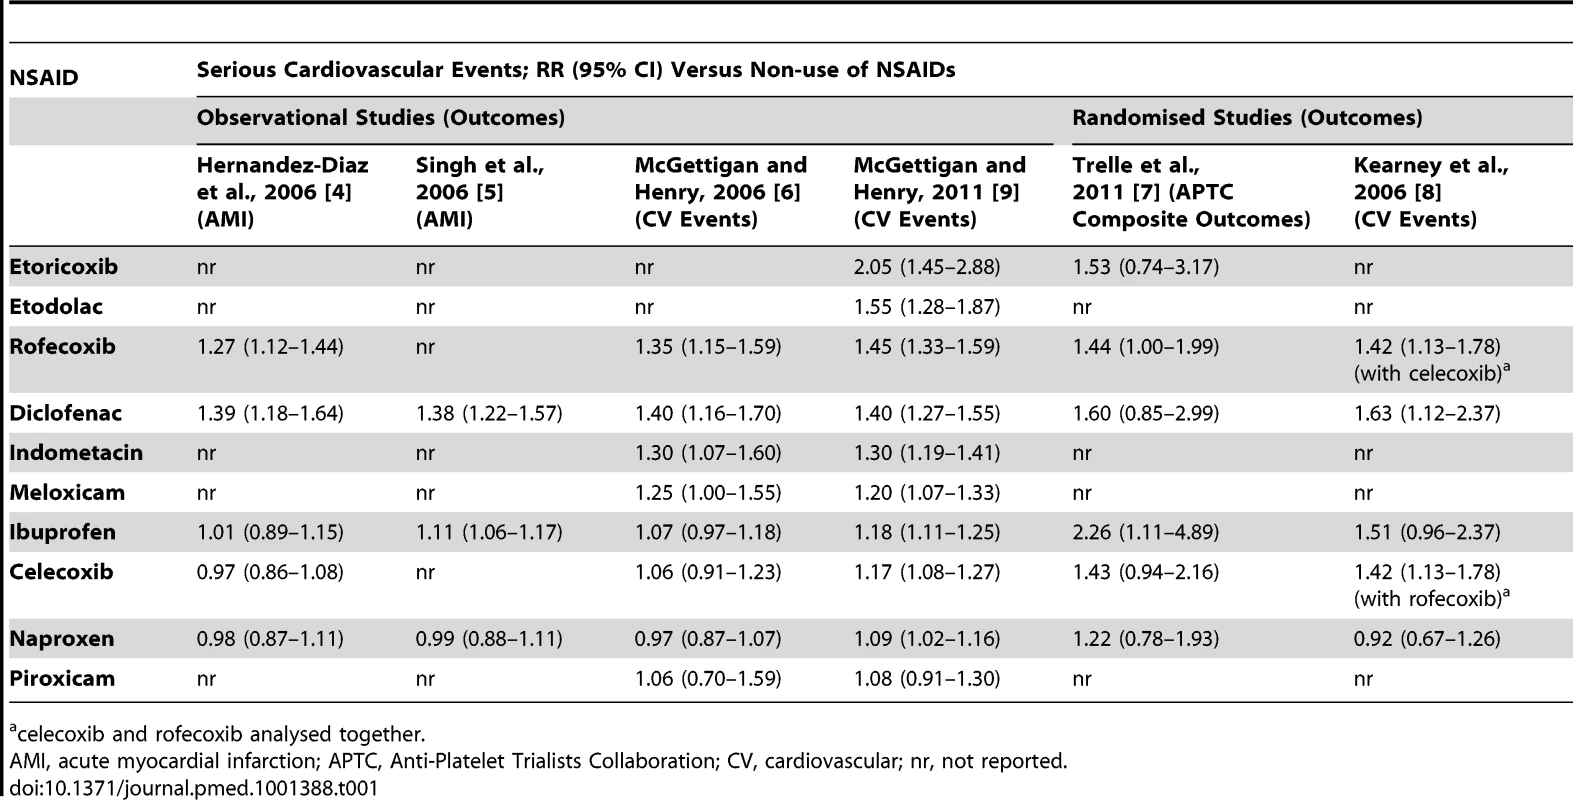 Summary of relative risk estimates for cardiovascular events with individual NSAIDs (versus non-use).